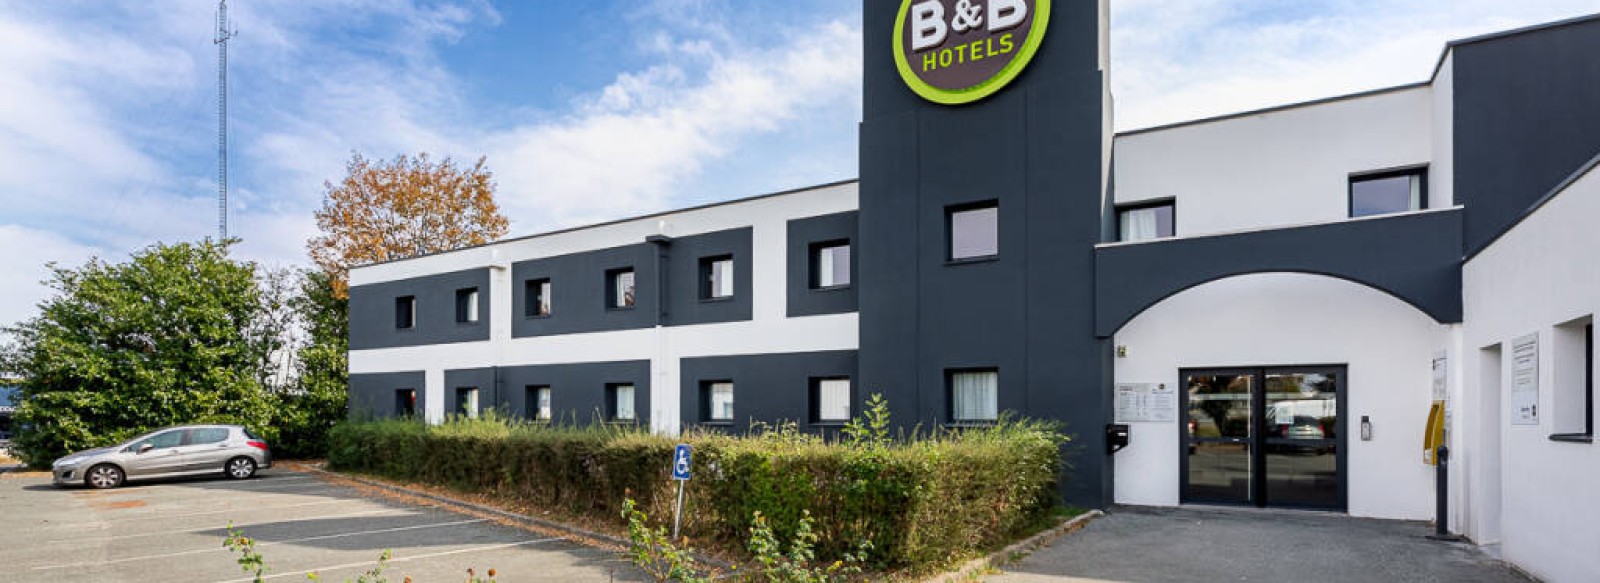 B&B Hotel Angers Parc Expos